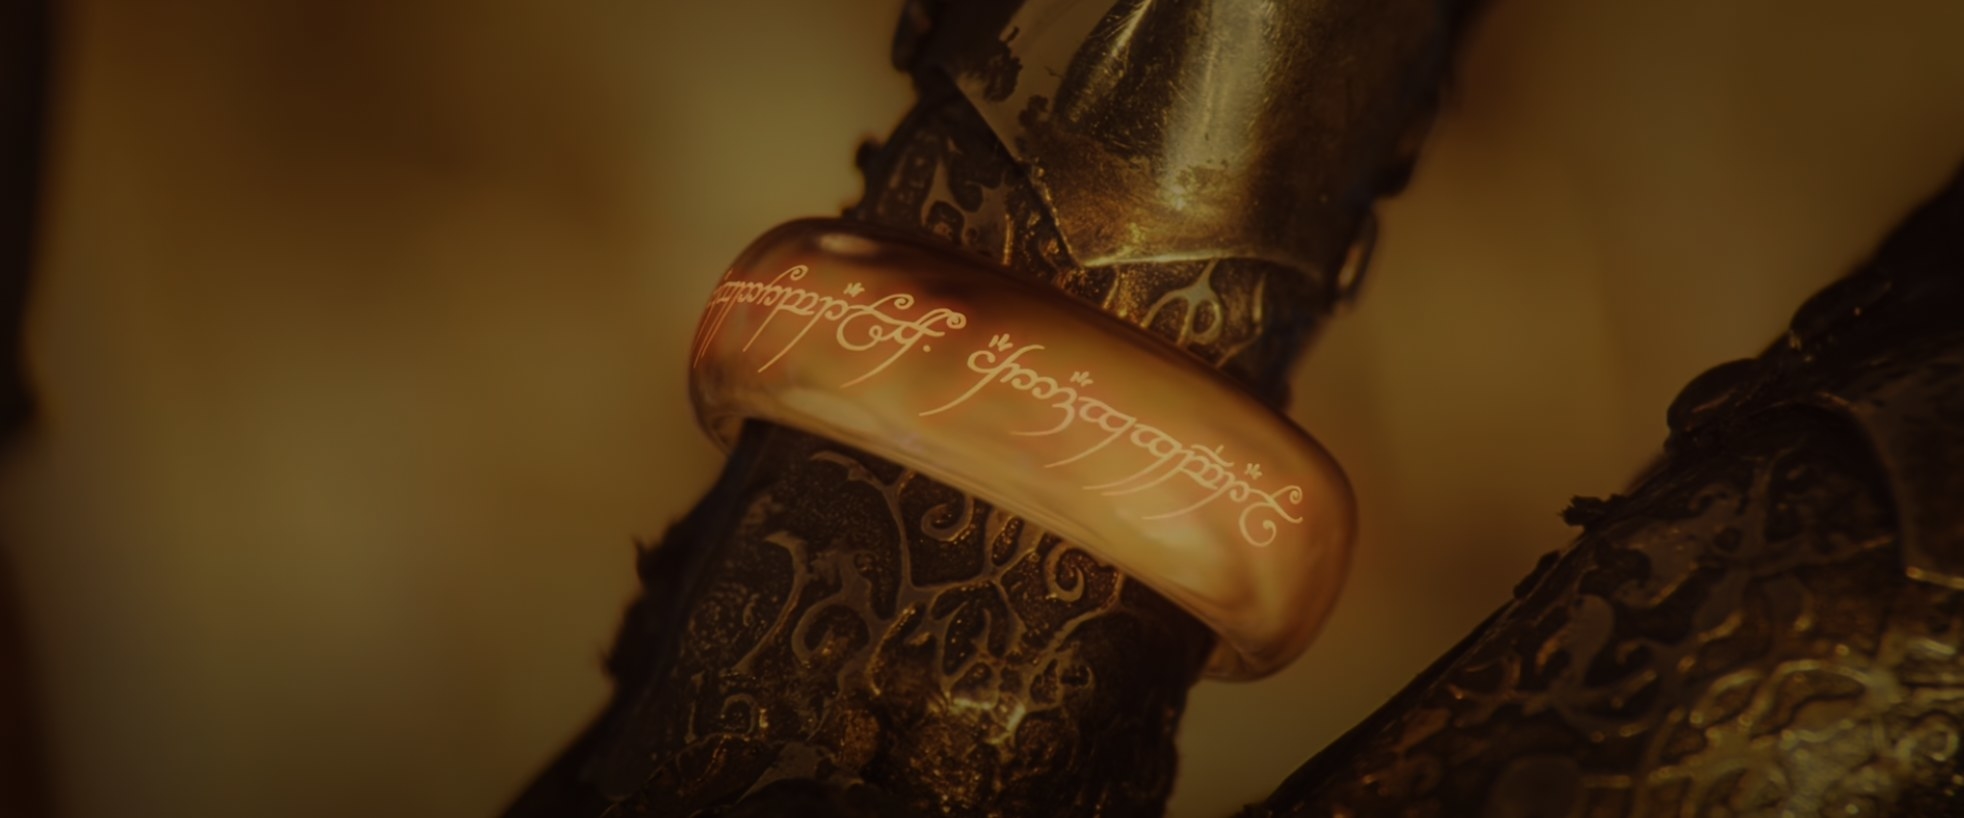 The Ring of Power glows Elvish lettering